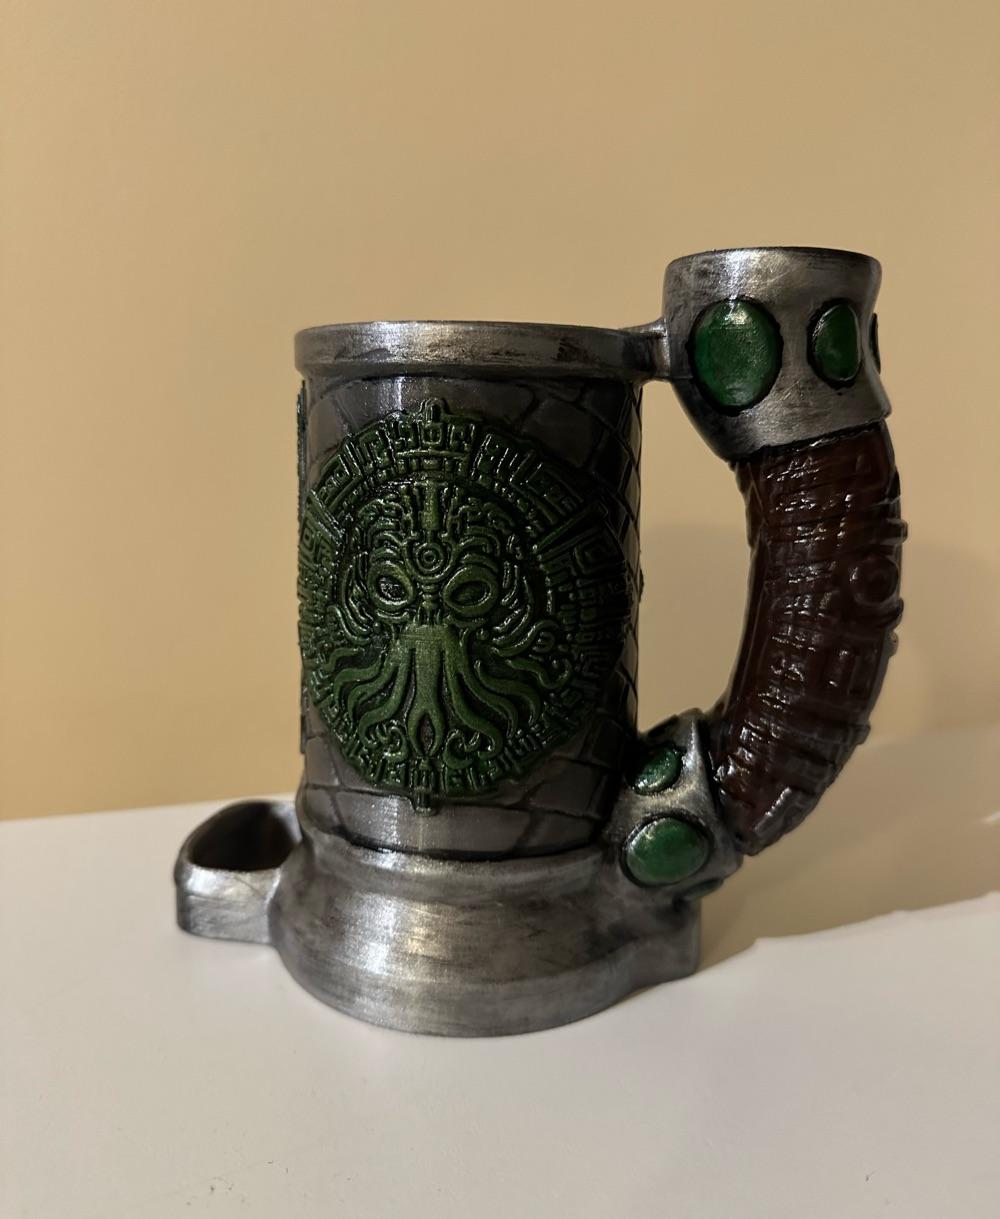 Cthulhu Can Cozy Dice Tower  - Thank you a lot! I dreamed about this and already painting another two. Working to put glass inside and separate with resin to drink other drinks than from can!  - 3d model